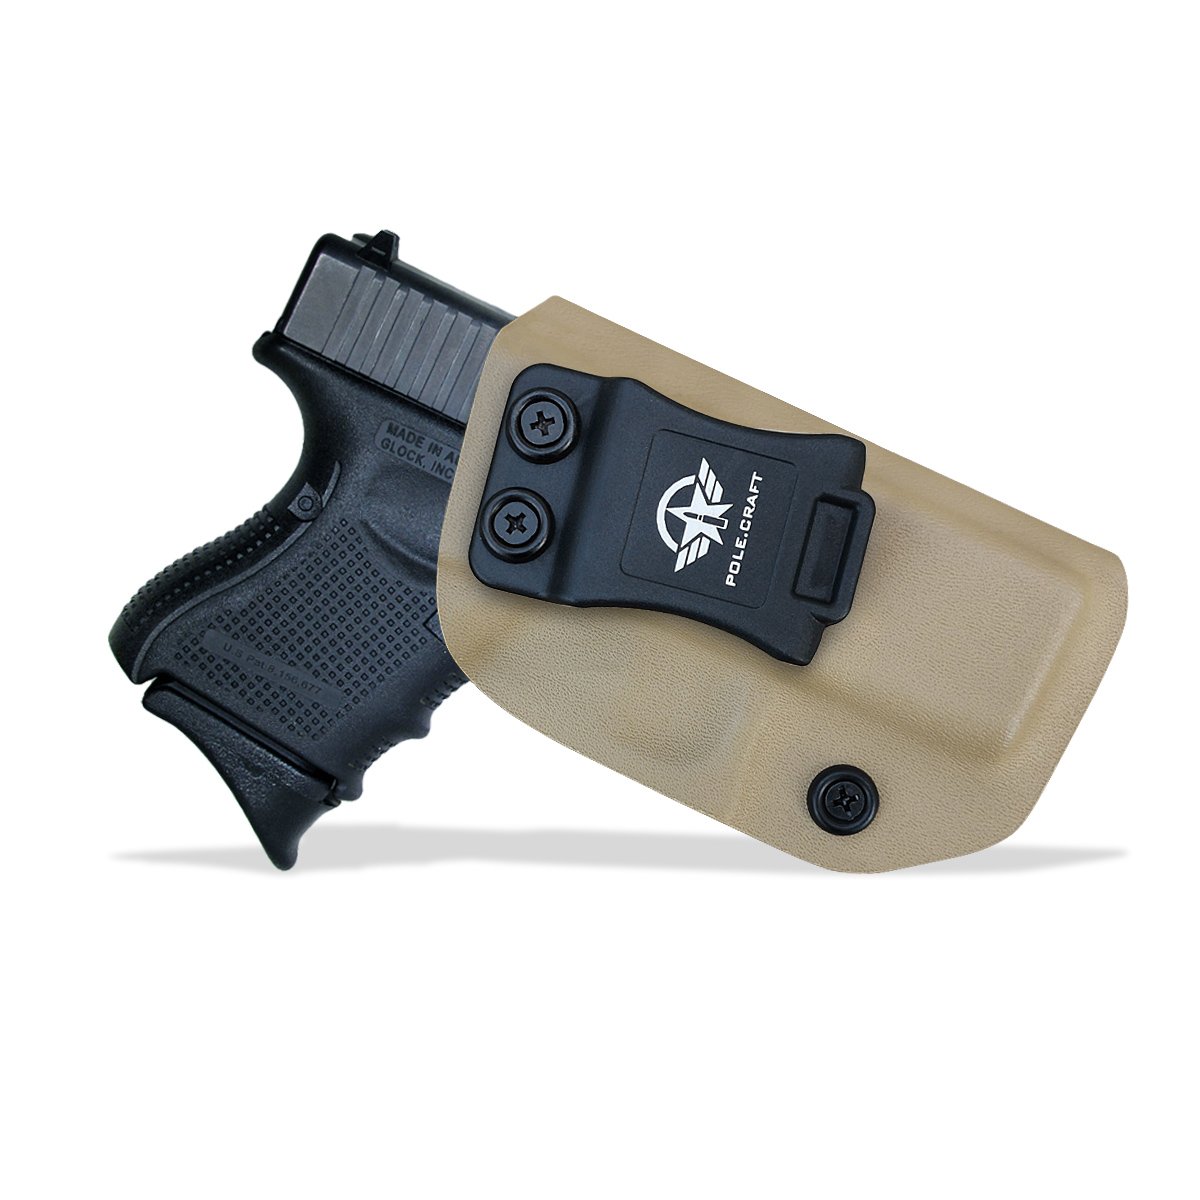 IWB Holster Holder for Concealed Carry Bags